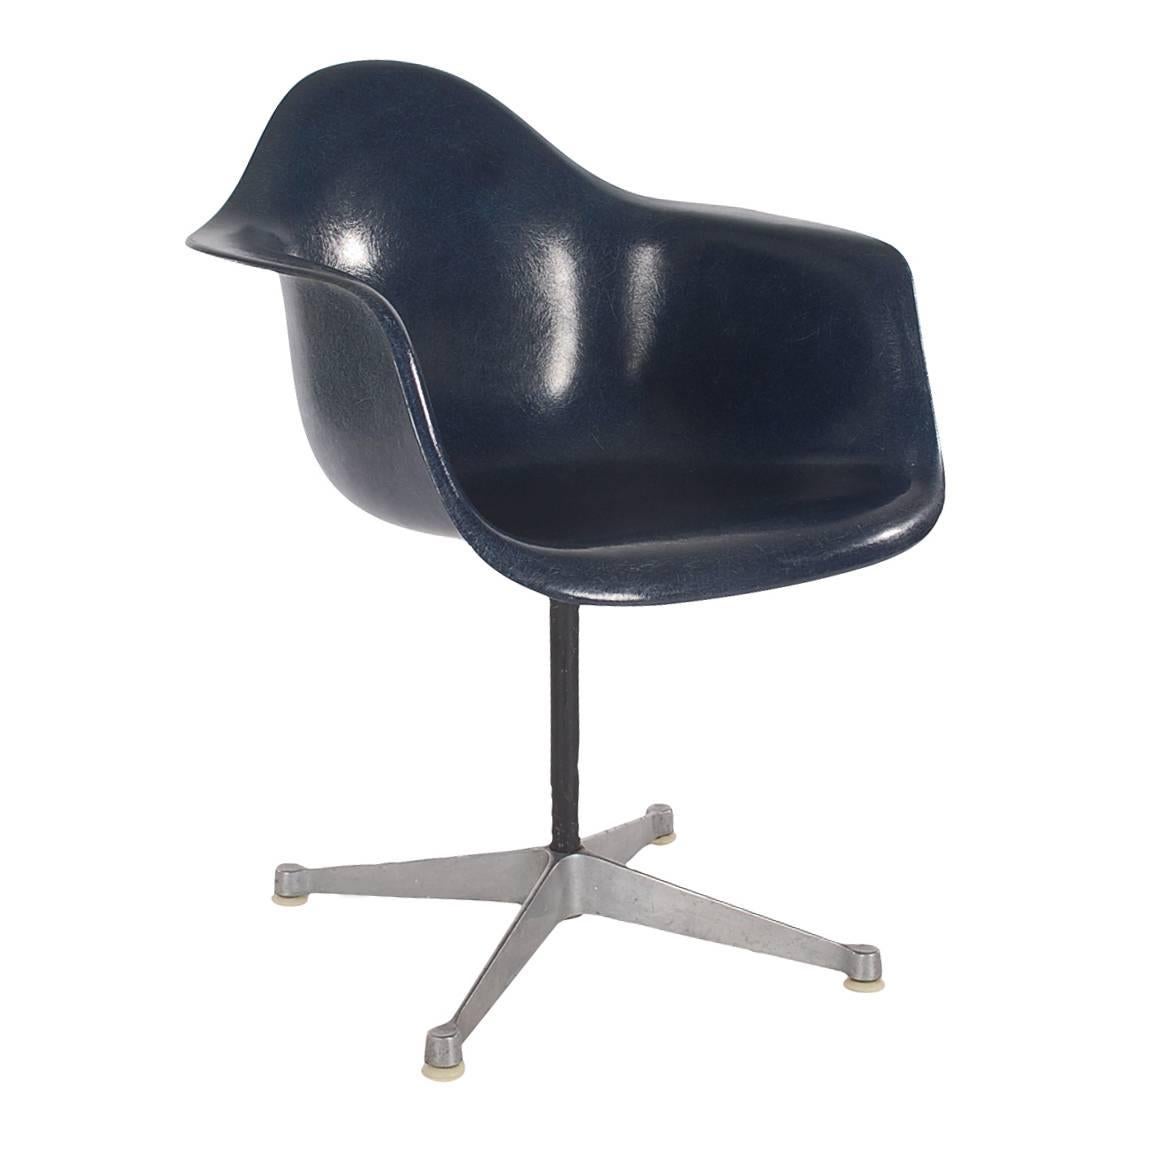 Here we have an iconic design Classic from the Mid-Century Modern period. This vintage fiberglass shell chair was designed by Charles Eames and produced by Herman Miller, circa 1972. A very hard to find color in navy blue or often referred to as